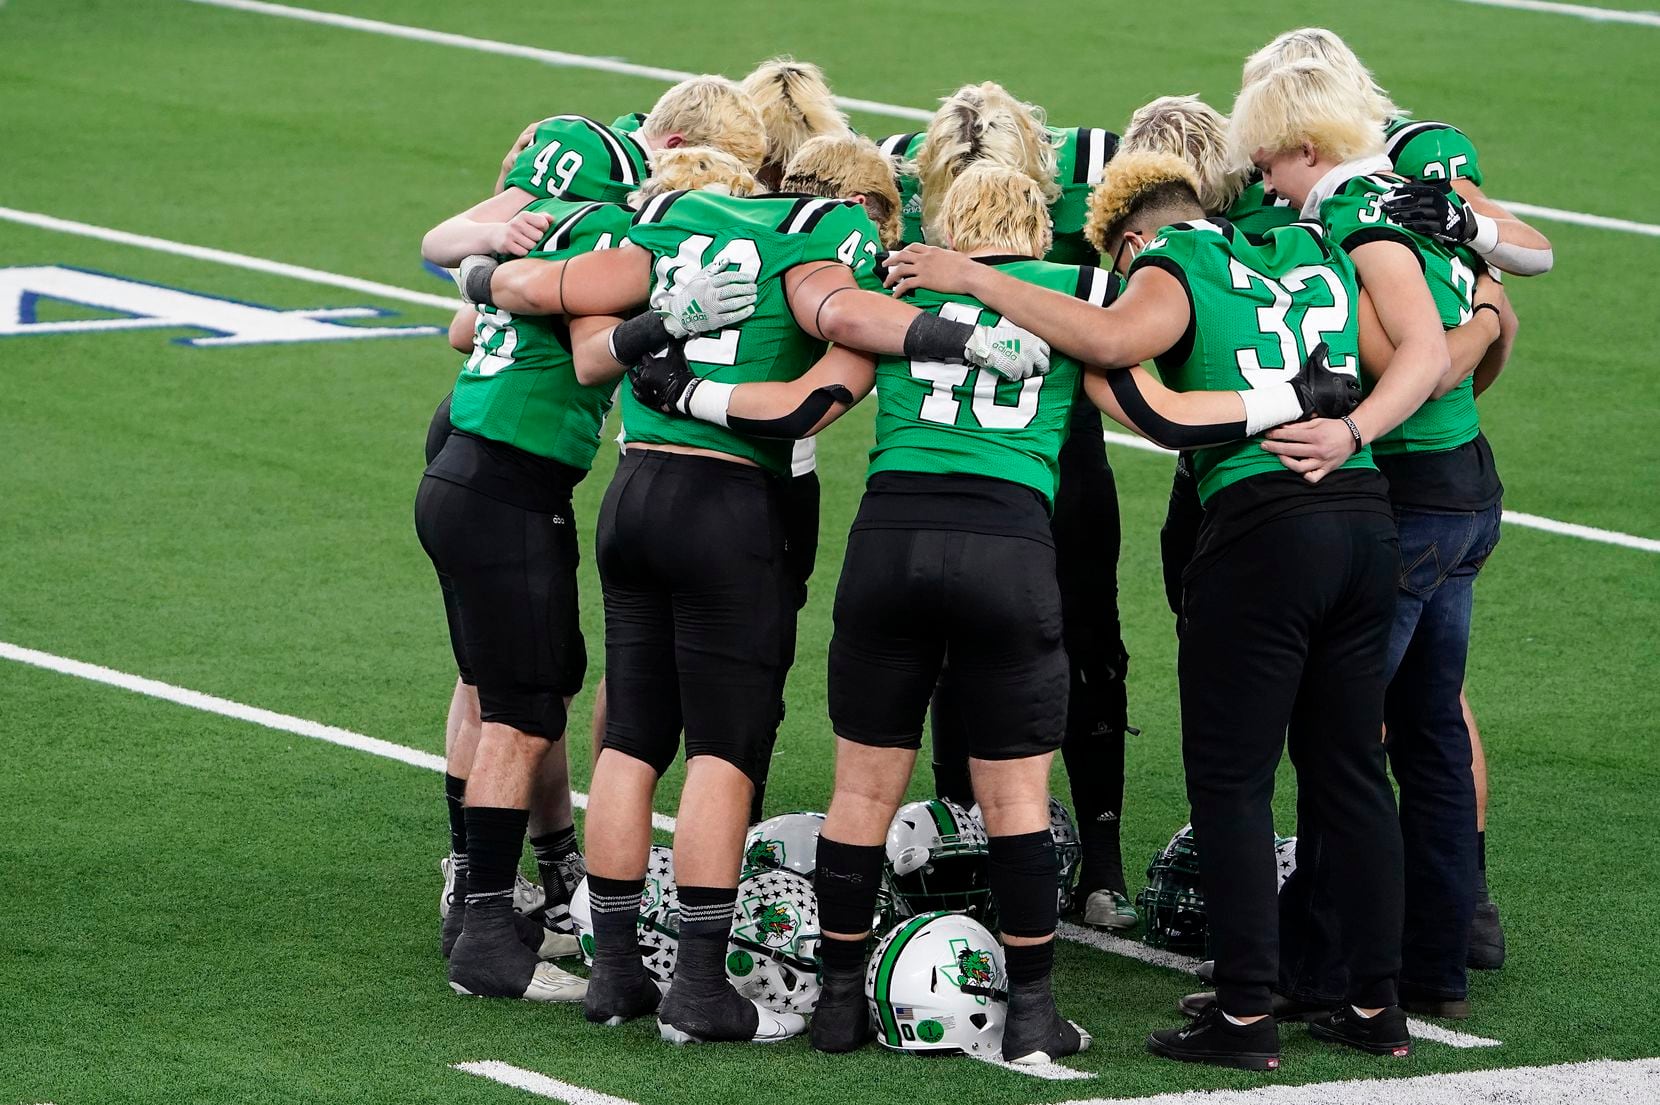 Southlake Carroll players huddle on the field before the Class 6A Division I state football championship game against Austin Westlake at AT&T Stadium on Saturday, Jan. 16, 2021, in Arlington, Texas.